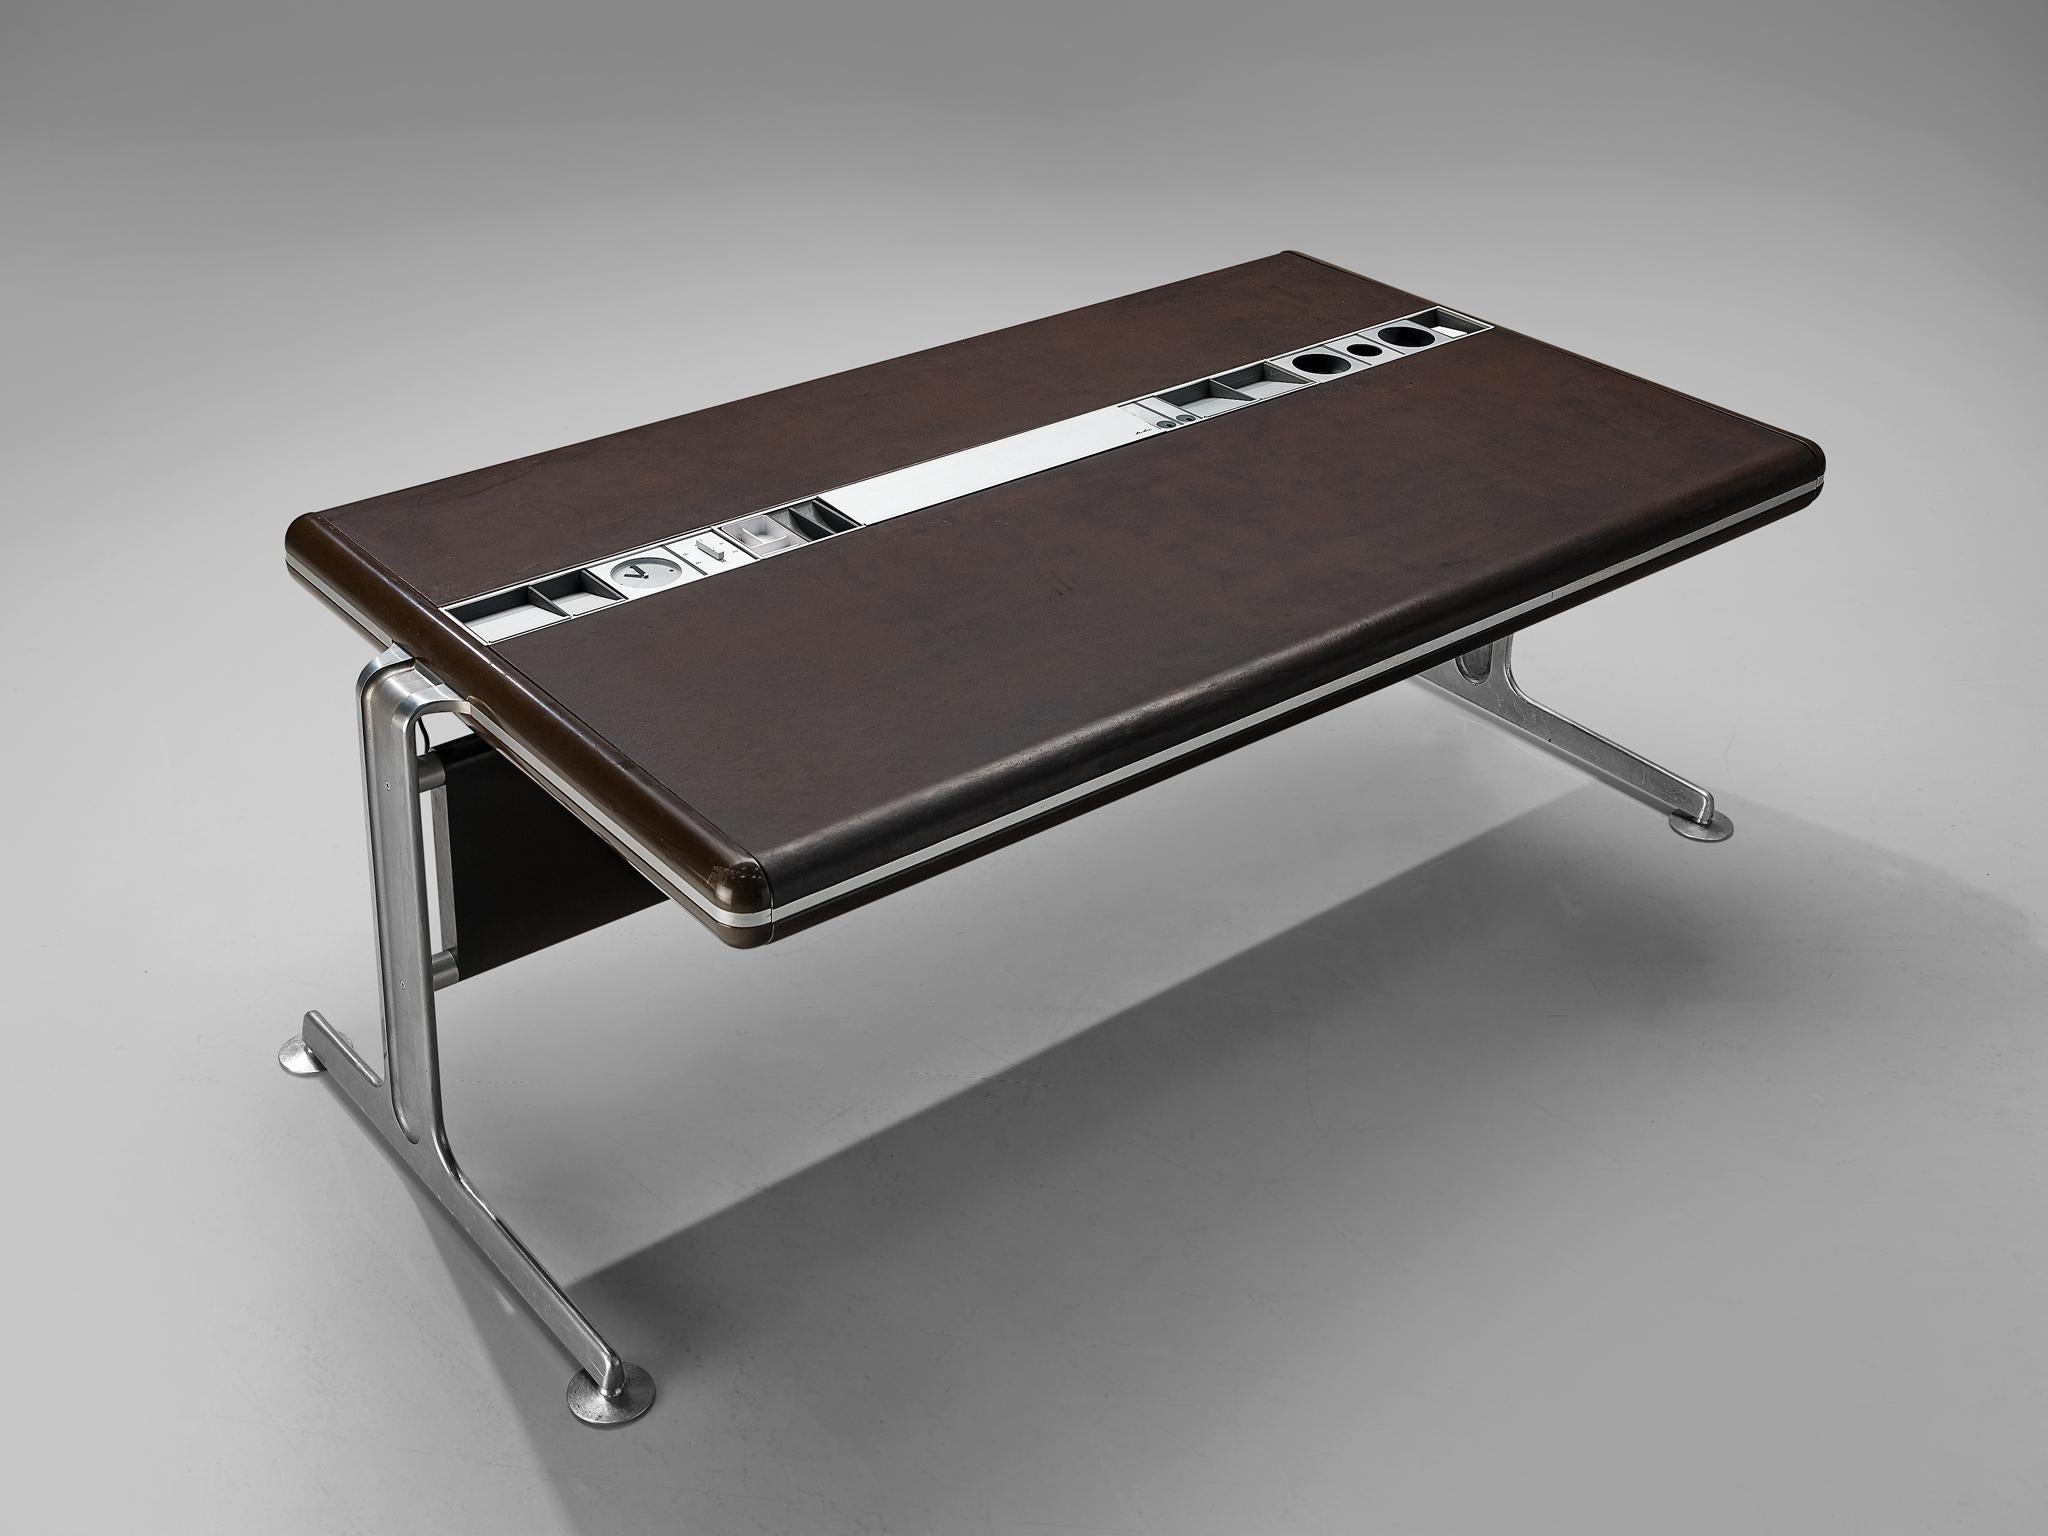 Alex Linder desk, leather, aluminum, Denmark, 1970s

This executive desk was designed by the Danish designer Alex Linder, who was not widely known. Nevertheless he made some wonderful designs in the 1970s, for example this desk. Executed in a